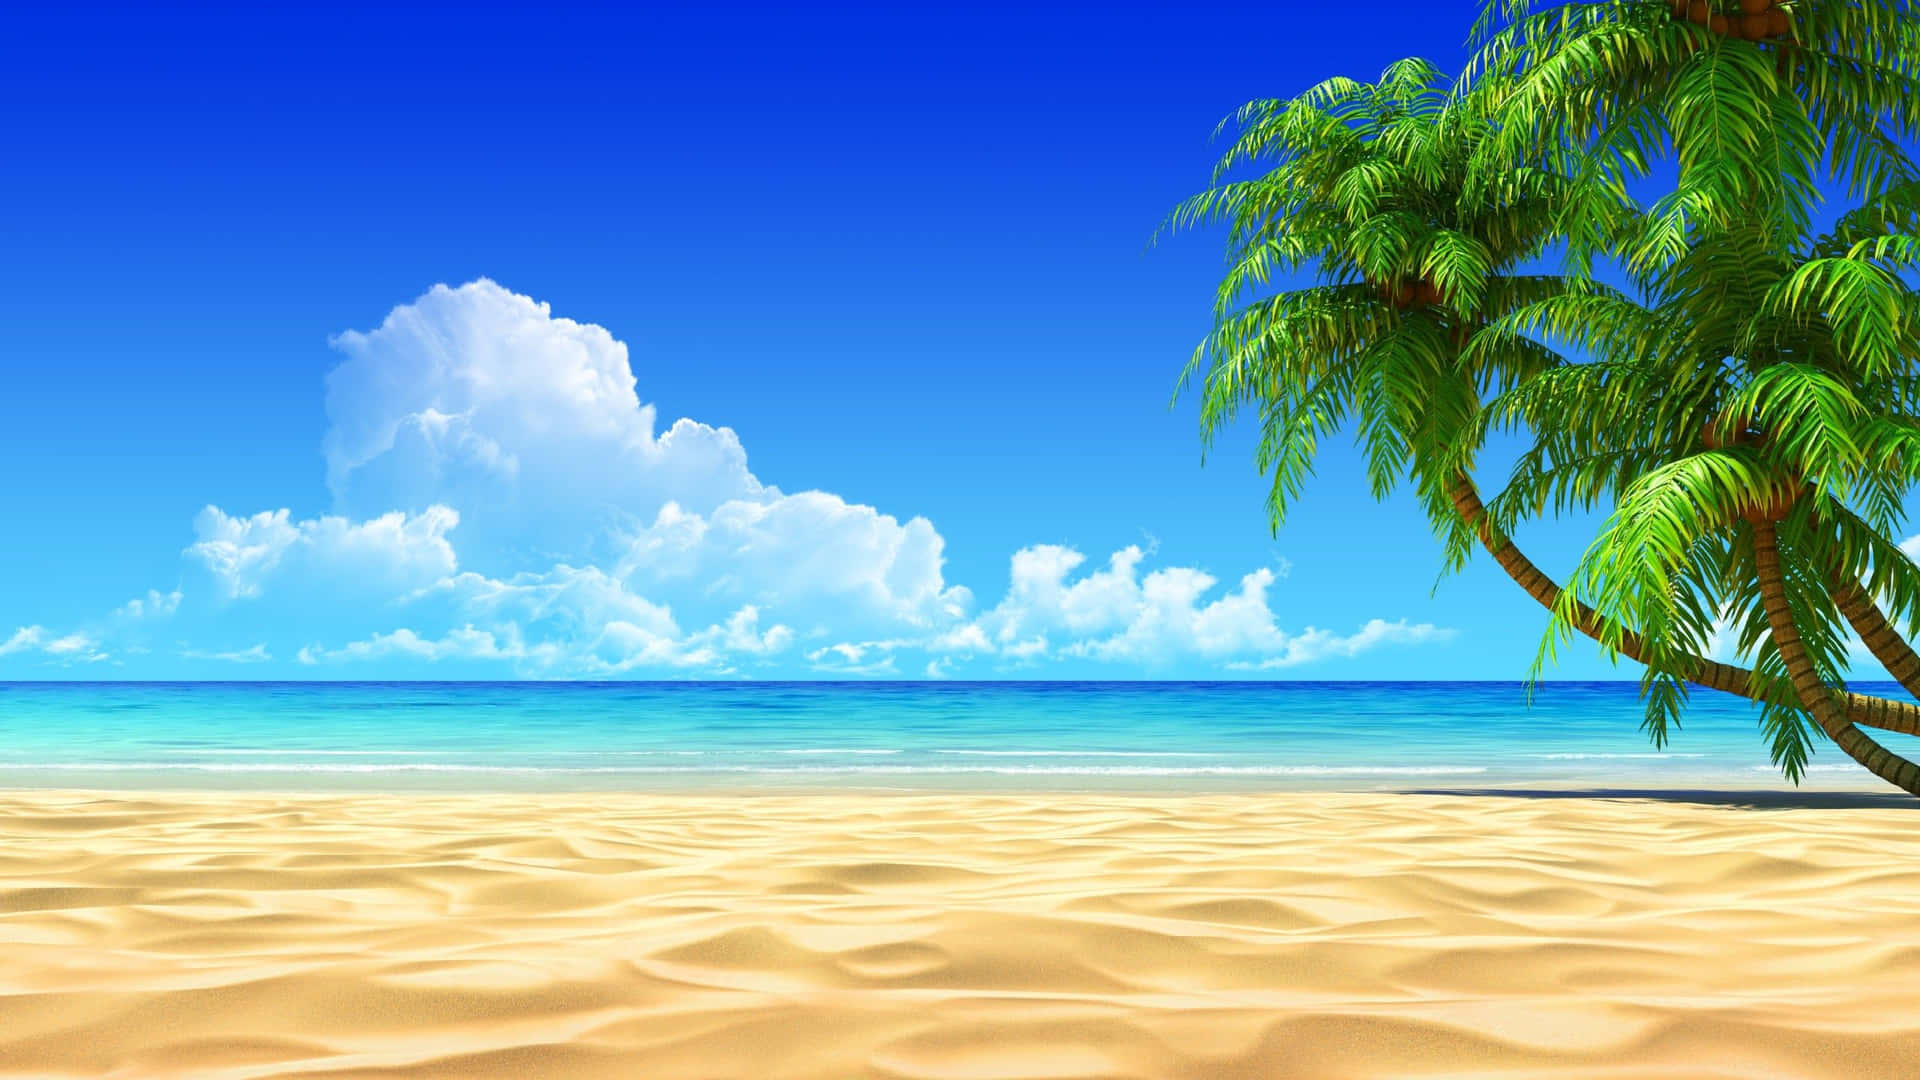 Enjoy a Sunny Day at the Beach! Wallpaper